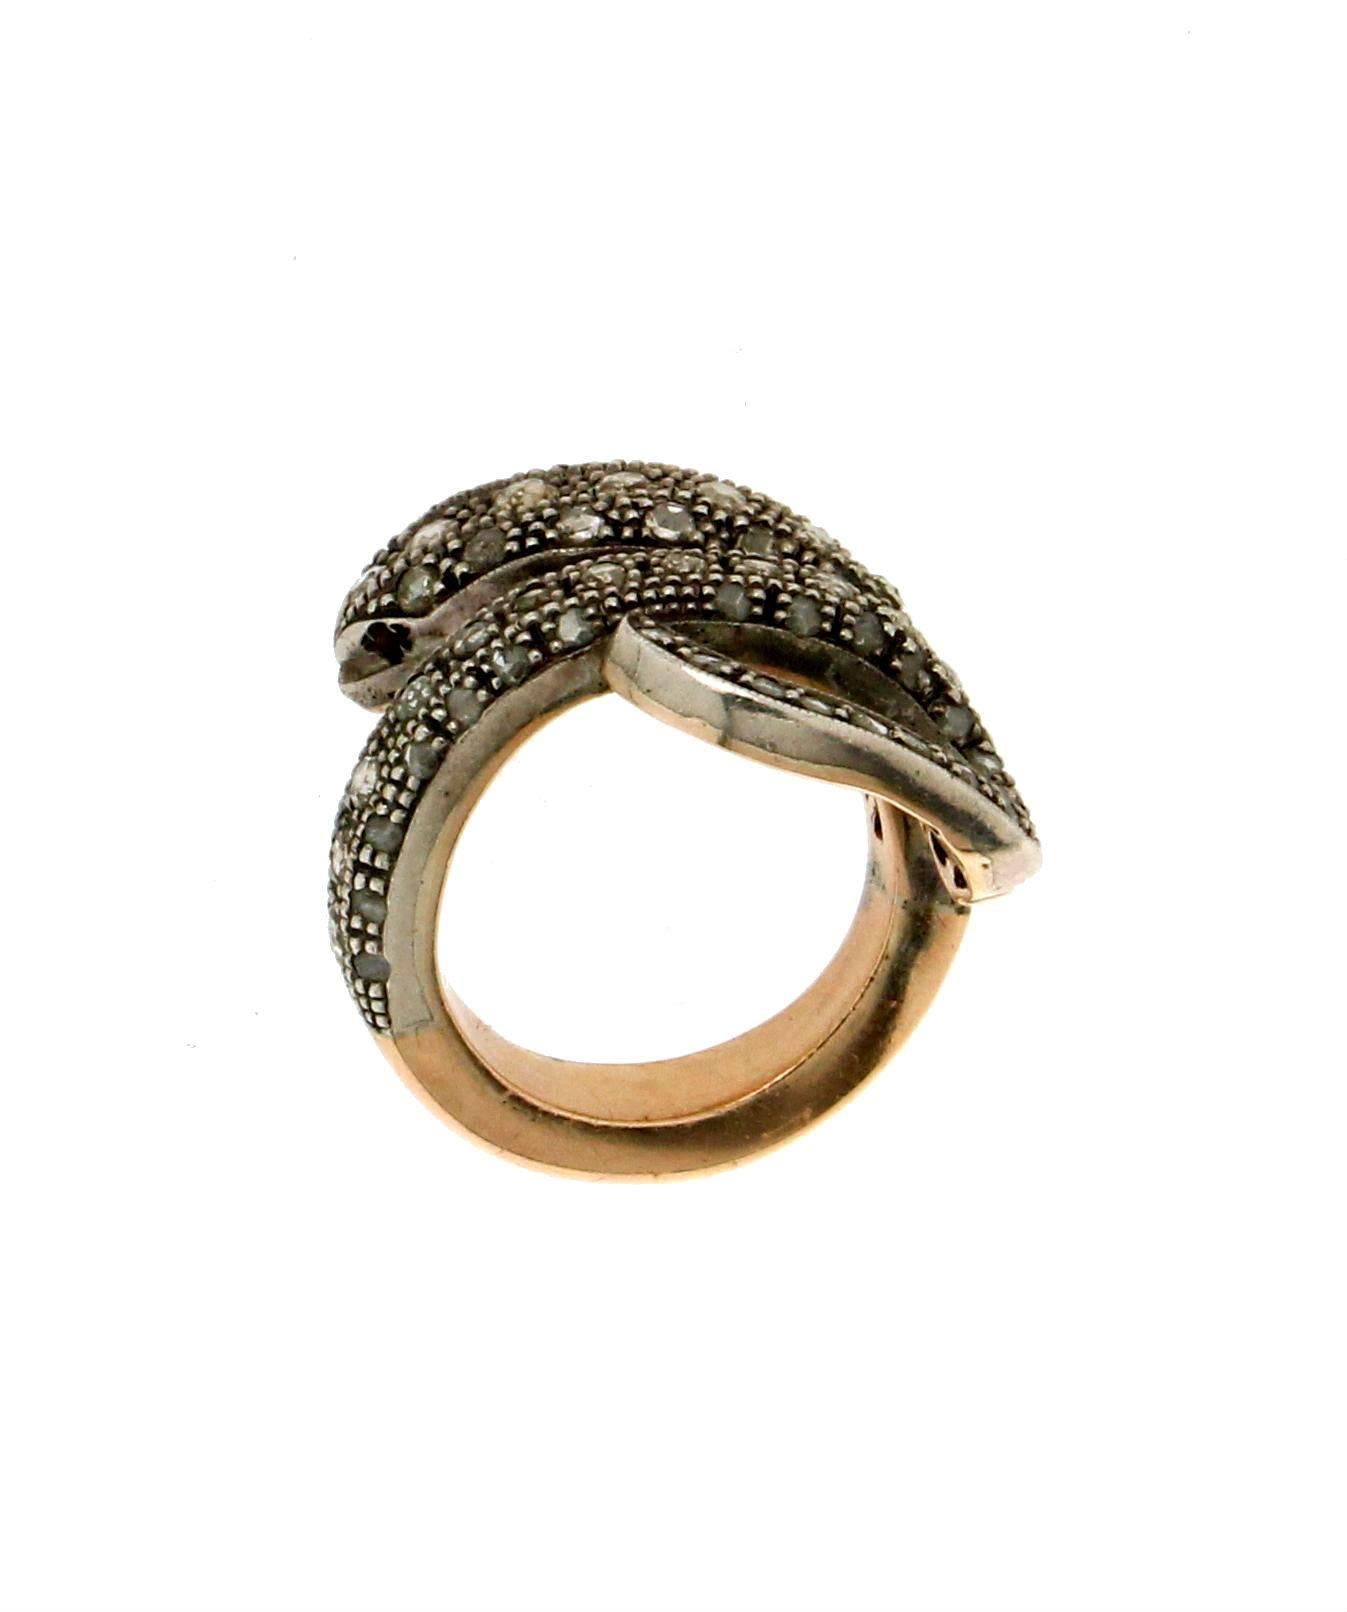 Artisan Handcraft Diamonds 14 Karat Yellow Gold and Silver Snake Cocktail Ring For Sale